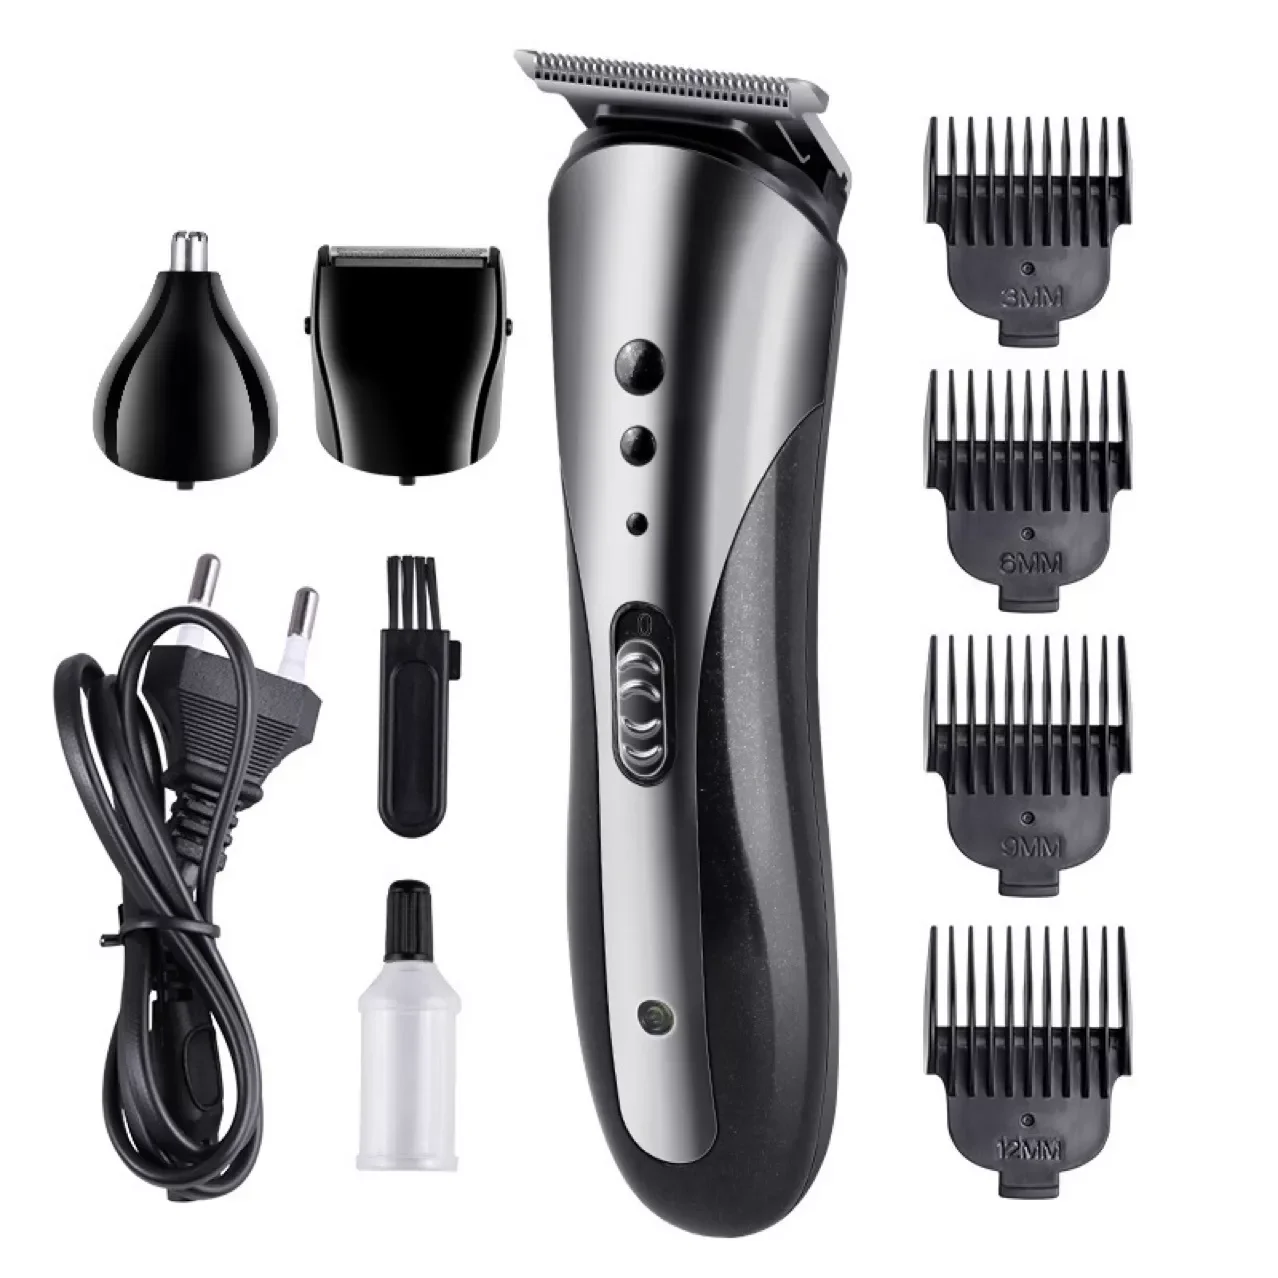 Multifunctional Split Hair Trimmer For Barbershop 3 In 1 Beard Shaver Nose Hair Trimmer Clippers Blades Hair Cutting Machine enlarge